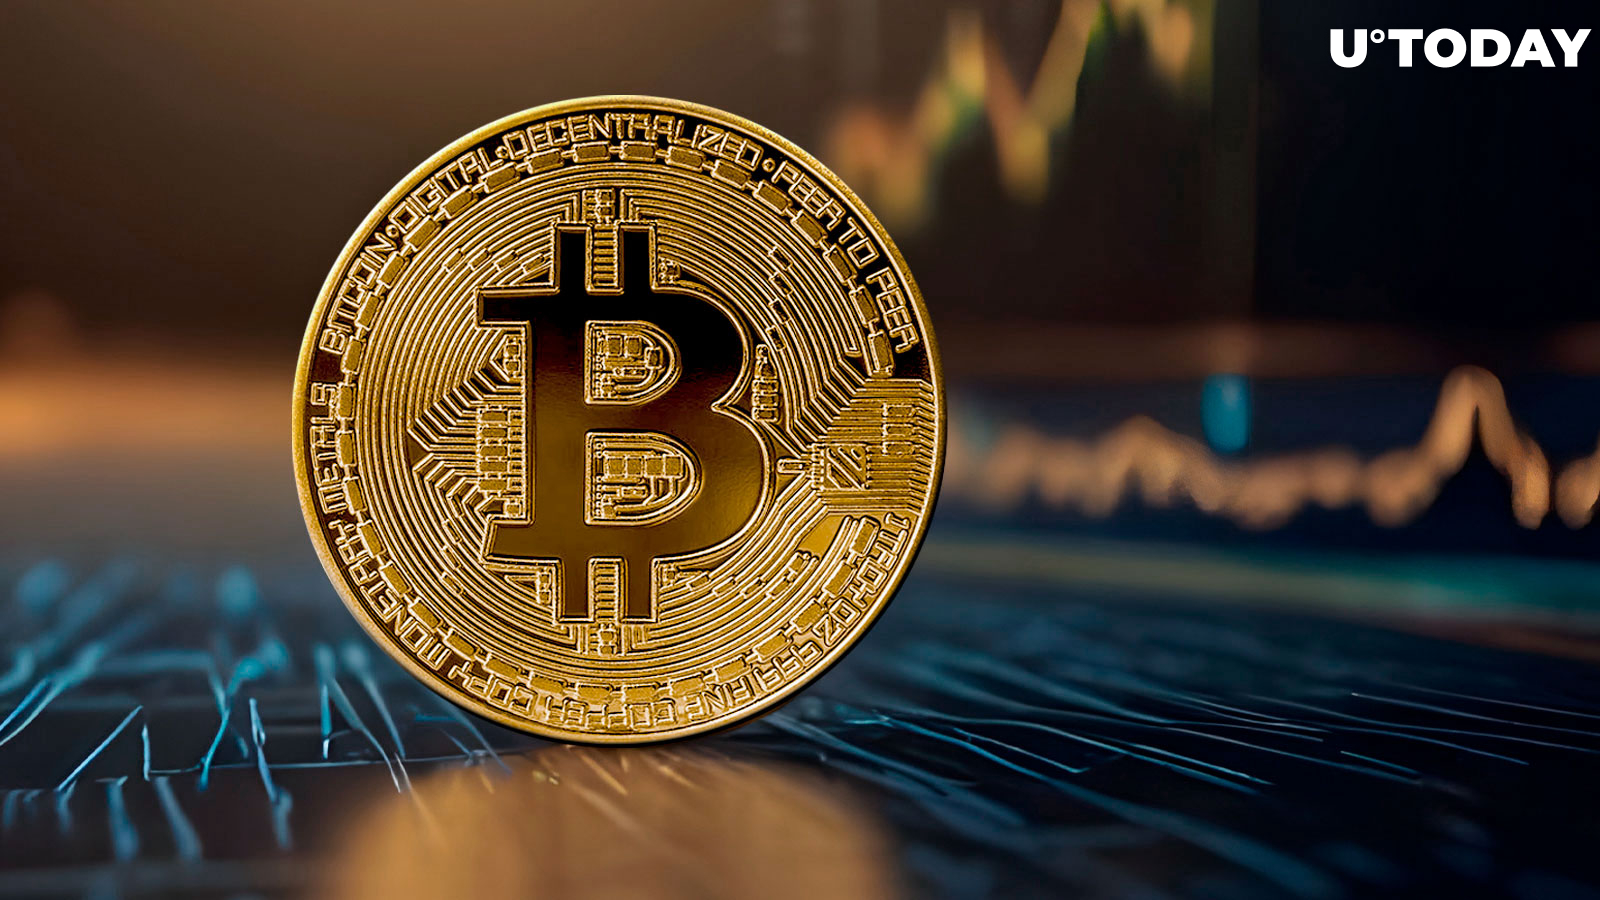 Here's Why Bitcoin (BTC) Suddenly Surged to $64,000